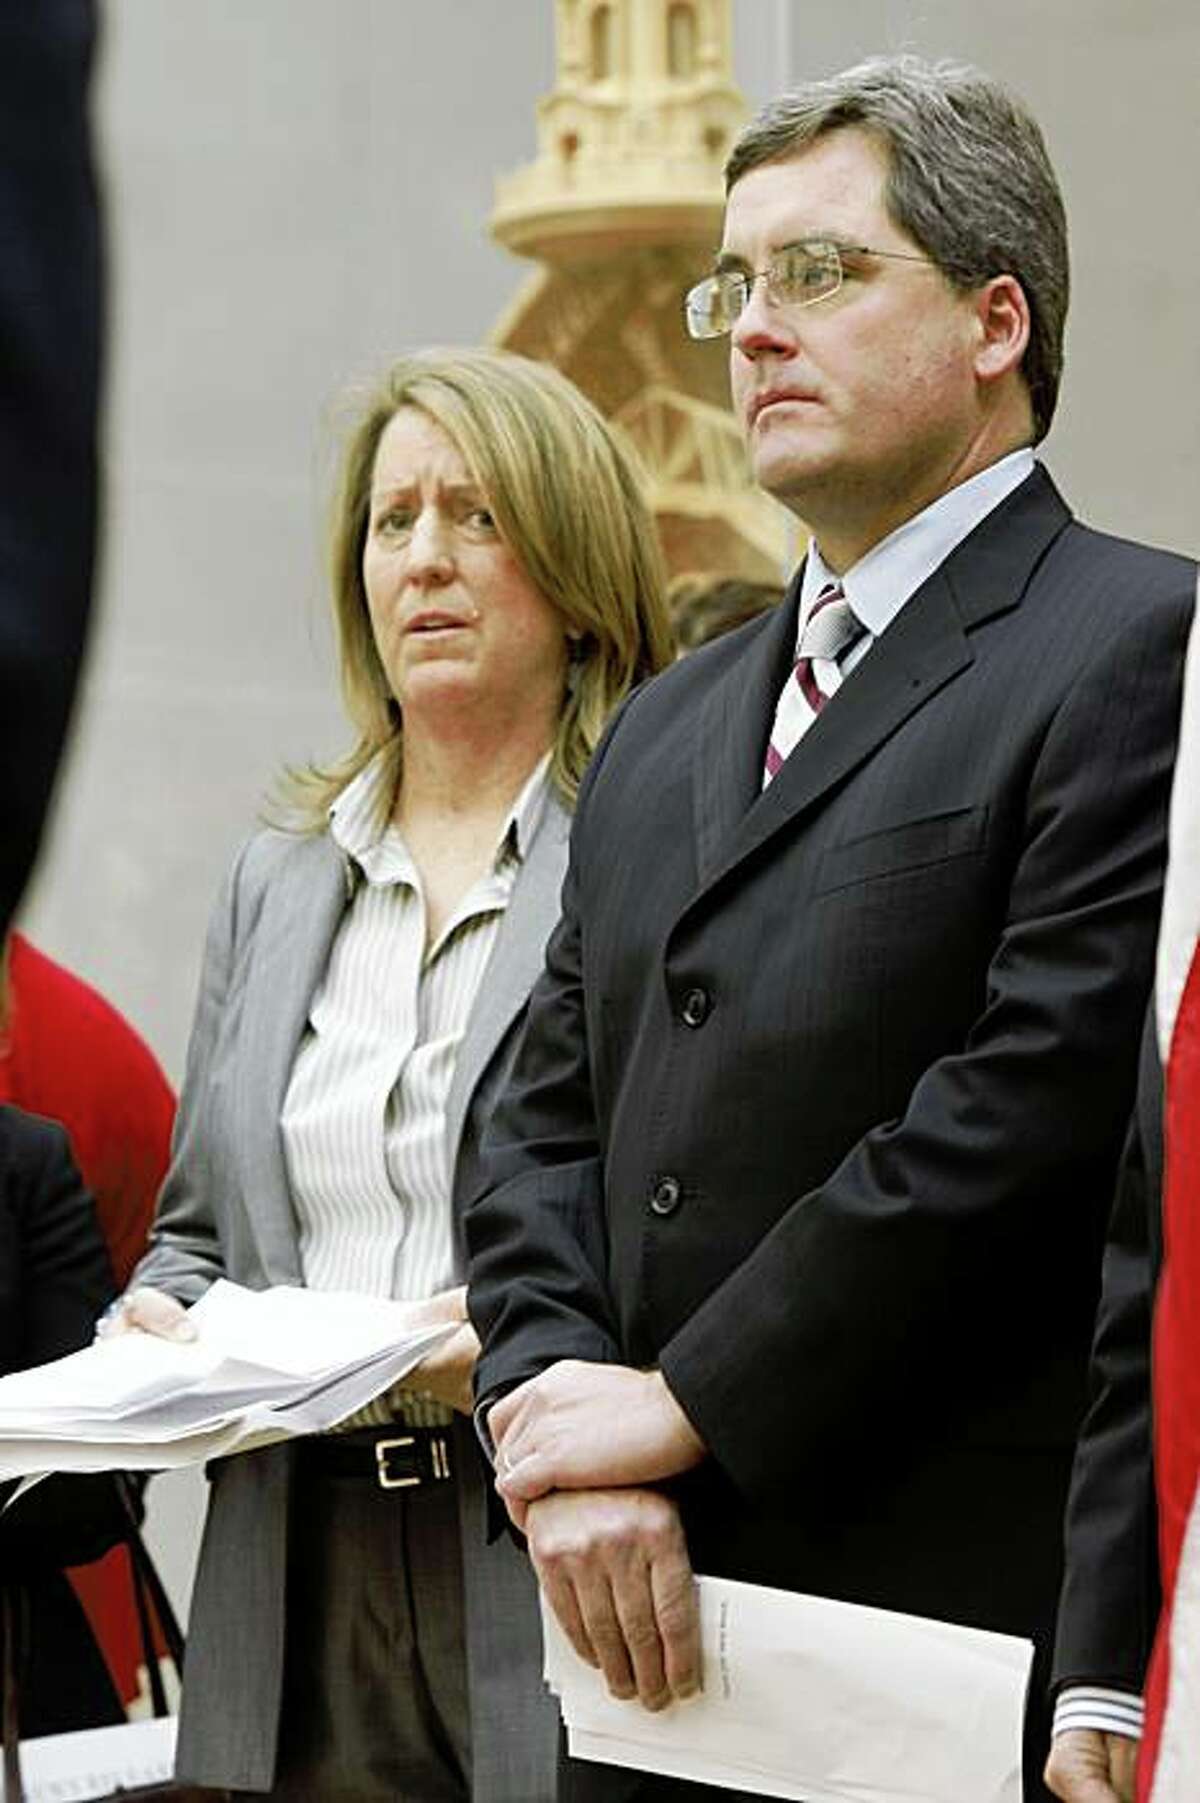 Kate Kendall from the National Center for Lesbian Rights and SF city attorney Dennis Herrera hear comments on the California Supreme Court Prop 8 decision at city hall in San Francisco, Calif., on Monday, May 26, 2009.